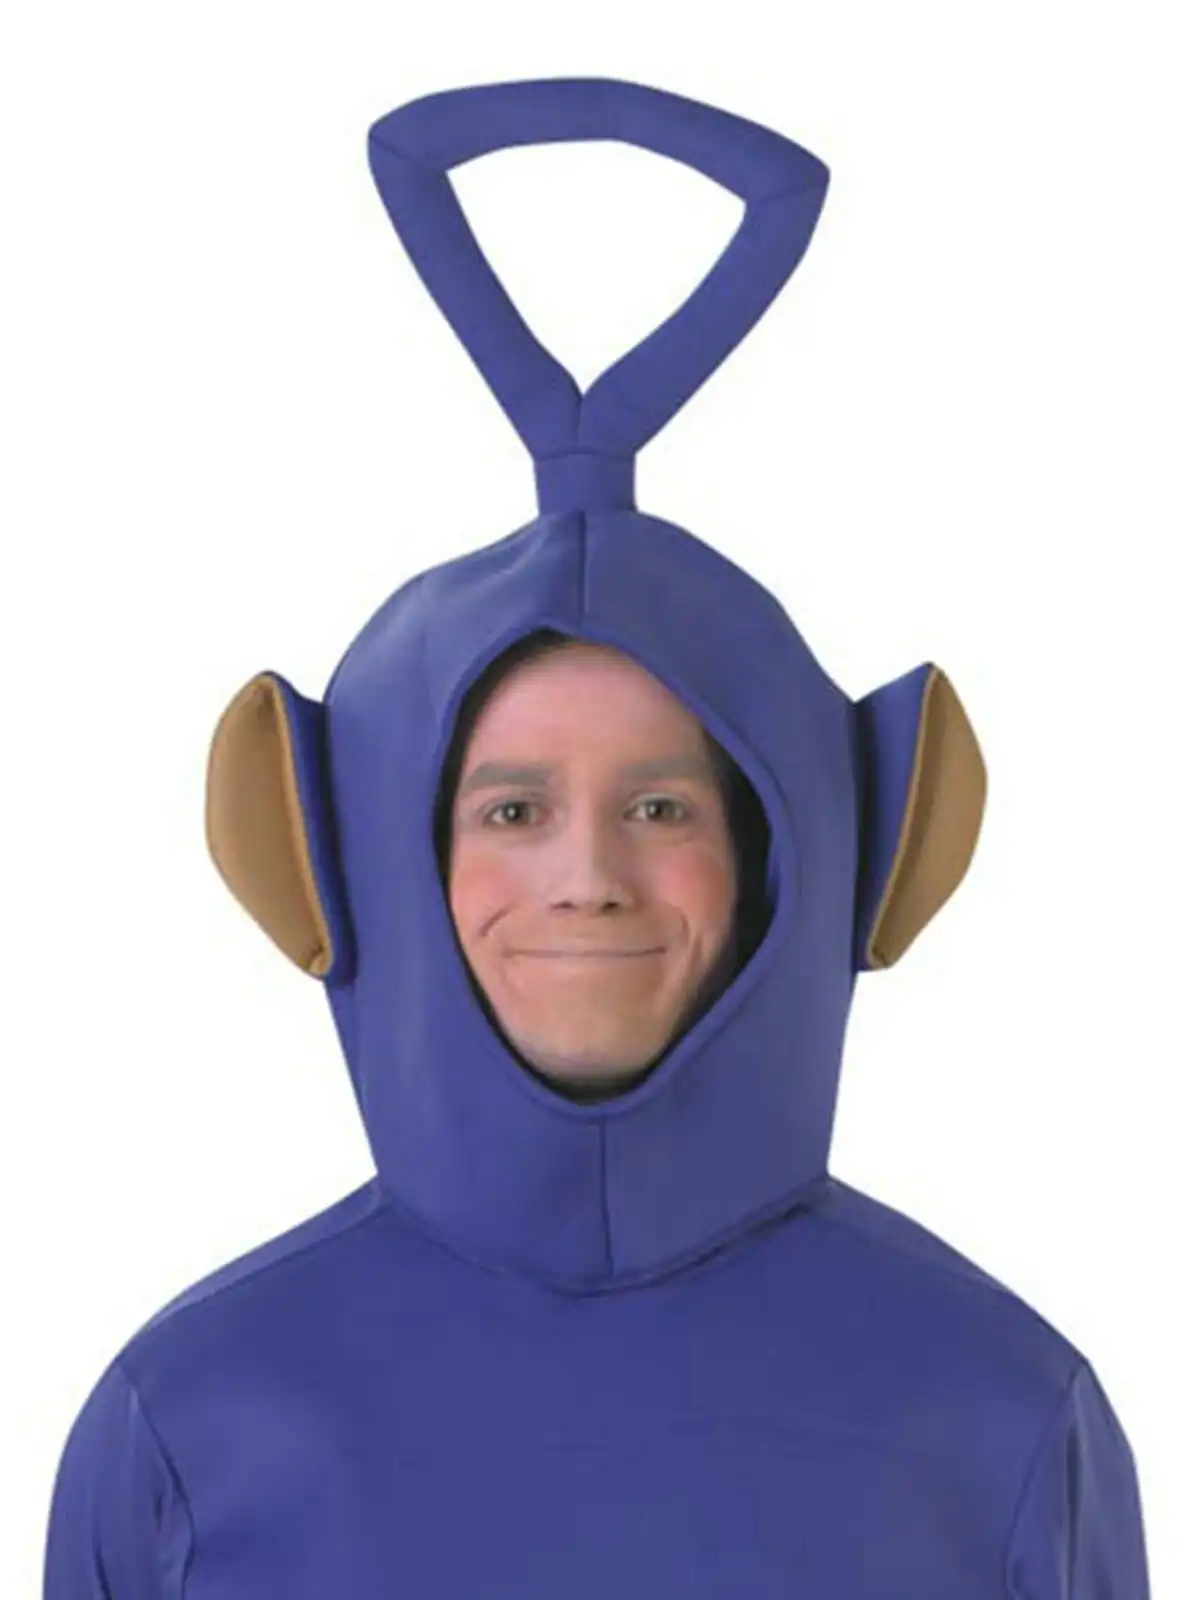 Rubies Tinky Winky Teletubbies Deluxe Teletubby Dress Up Adults Costume Size STD